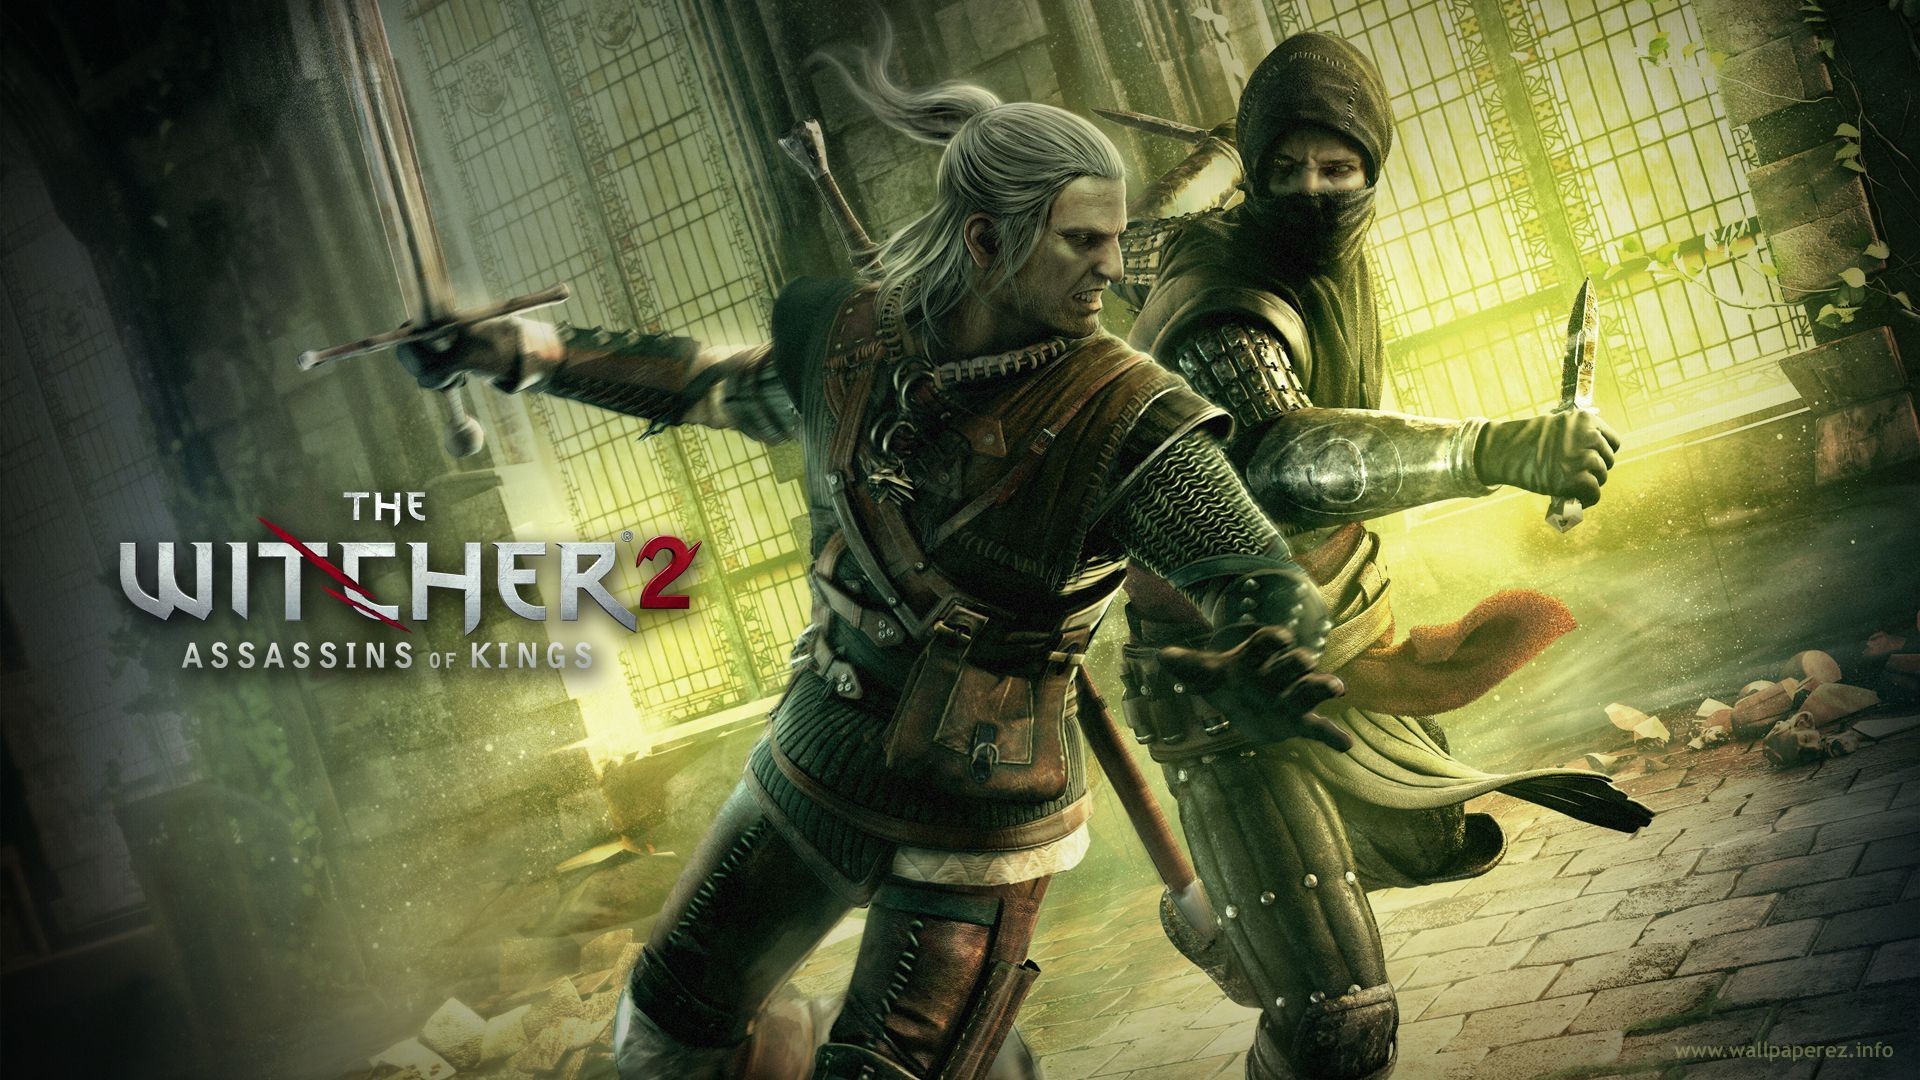 The Witcher, Wiedźmin, The Witcher 2 Assassins Of Kings Wallpaper